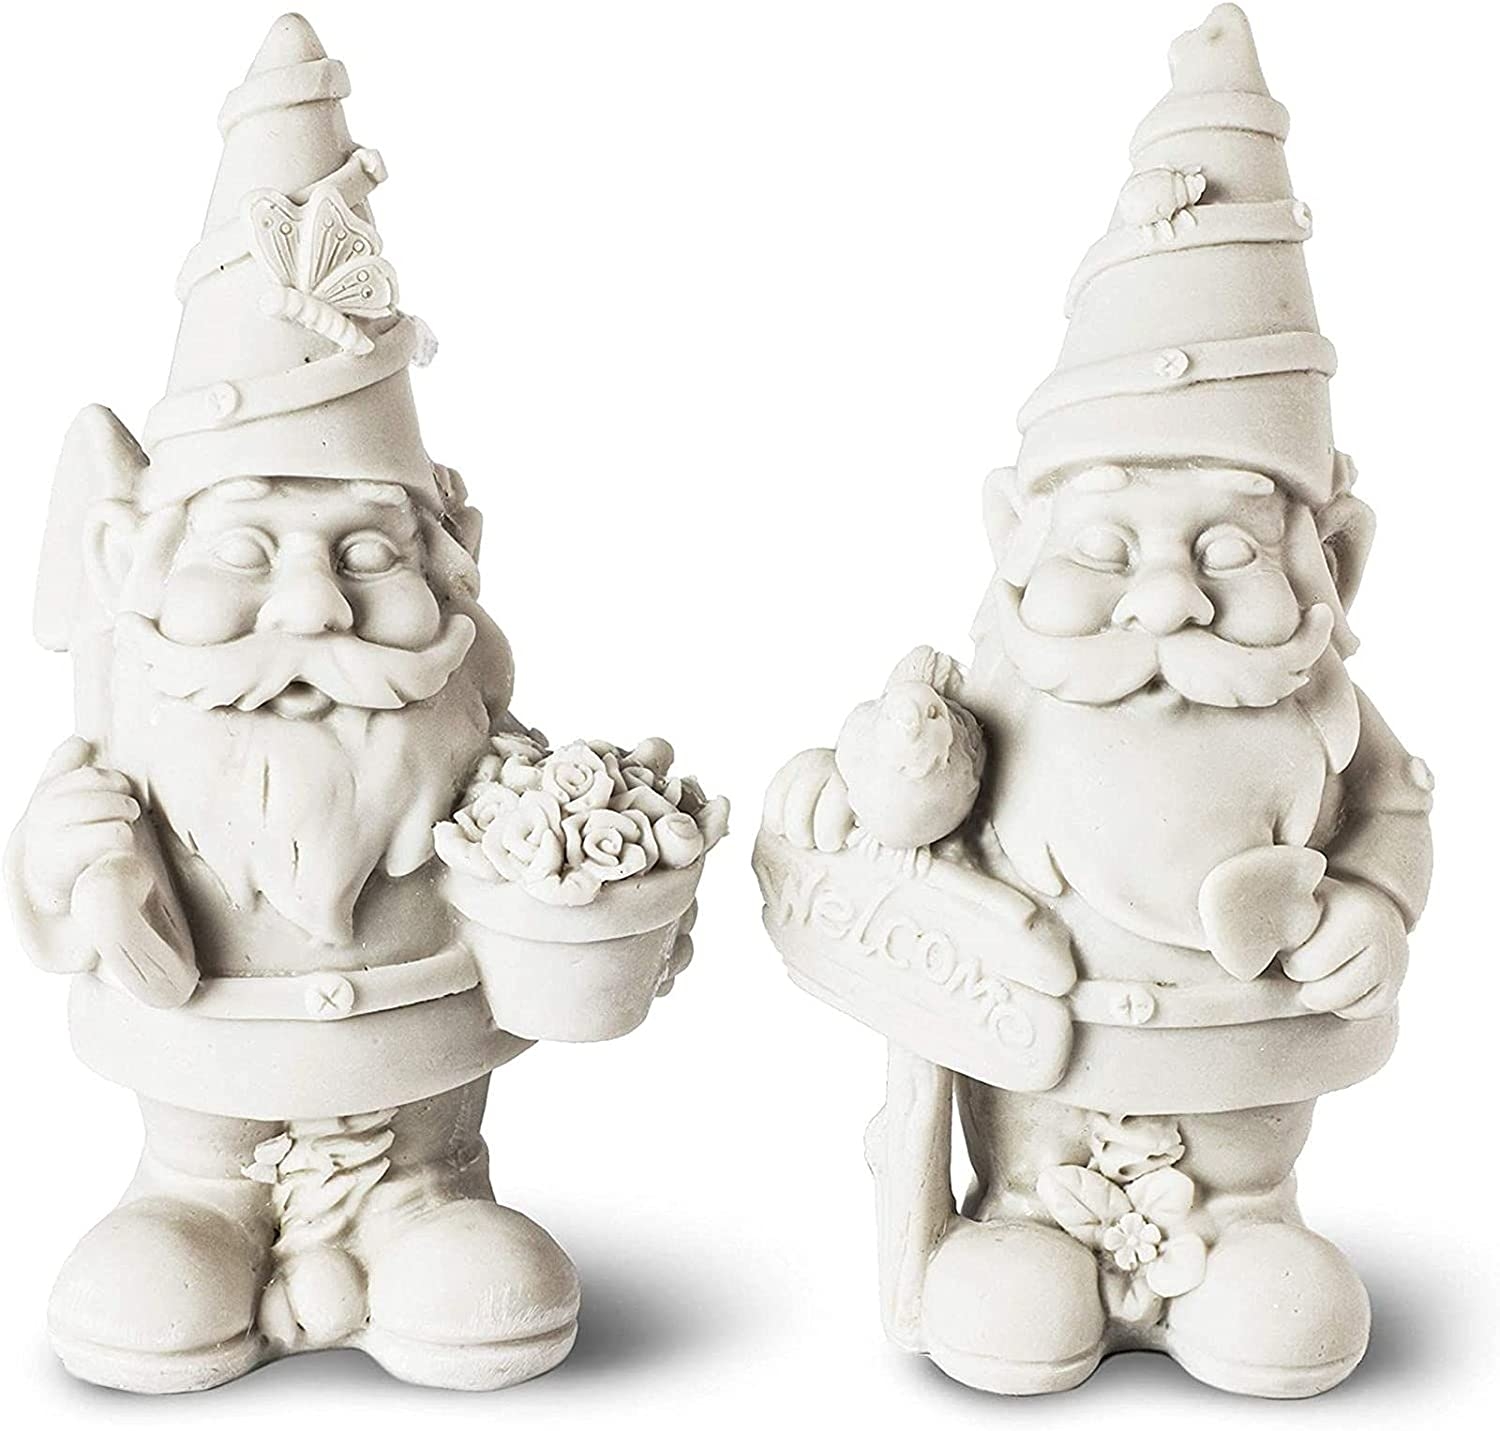 2 Pack Mini Paint Your Own Garden Gnome Statues, Unpainted DIY Ceramic Figurines for Kids and Adults (5 in) Import To Shop